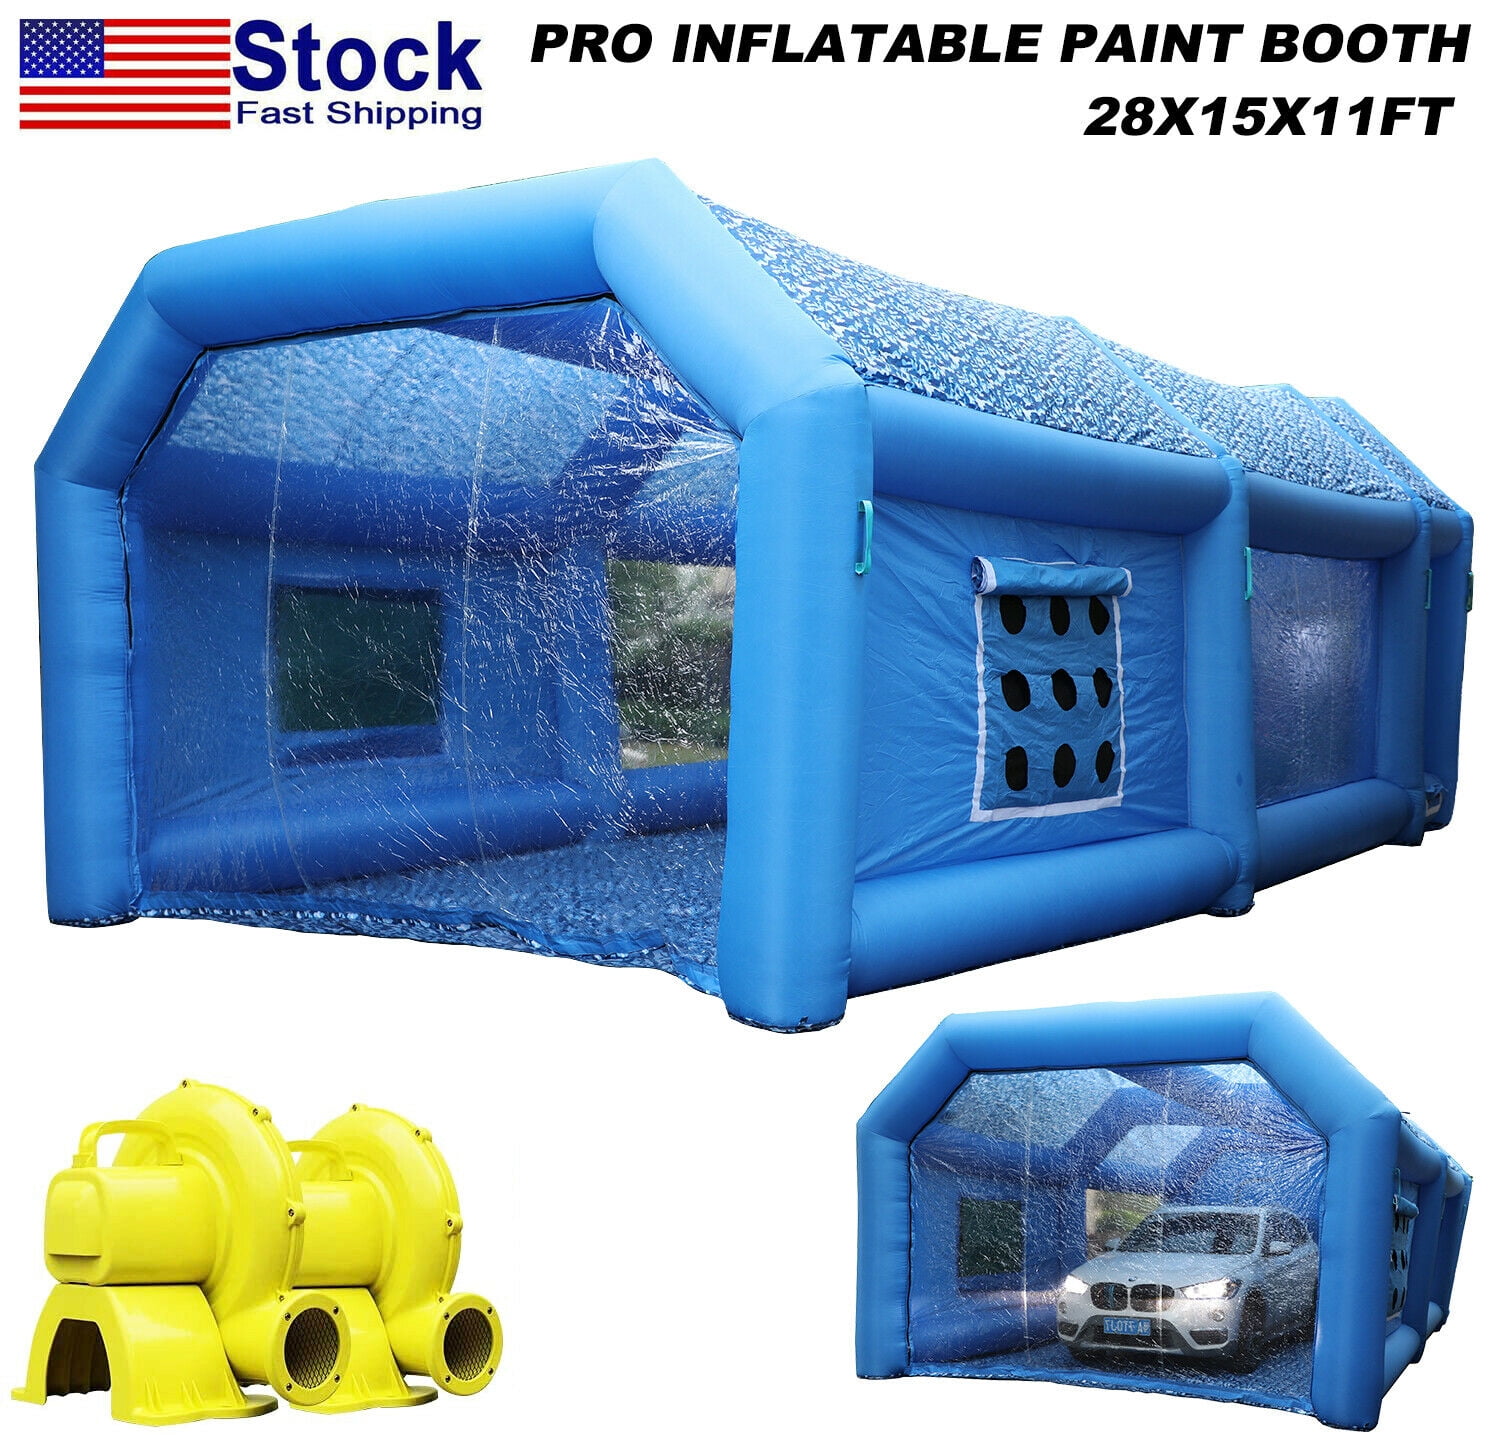 Inflatable painting booth - tools - by owner - sale - craigslist